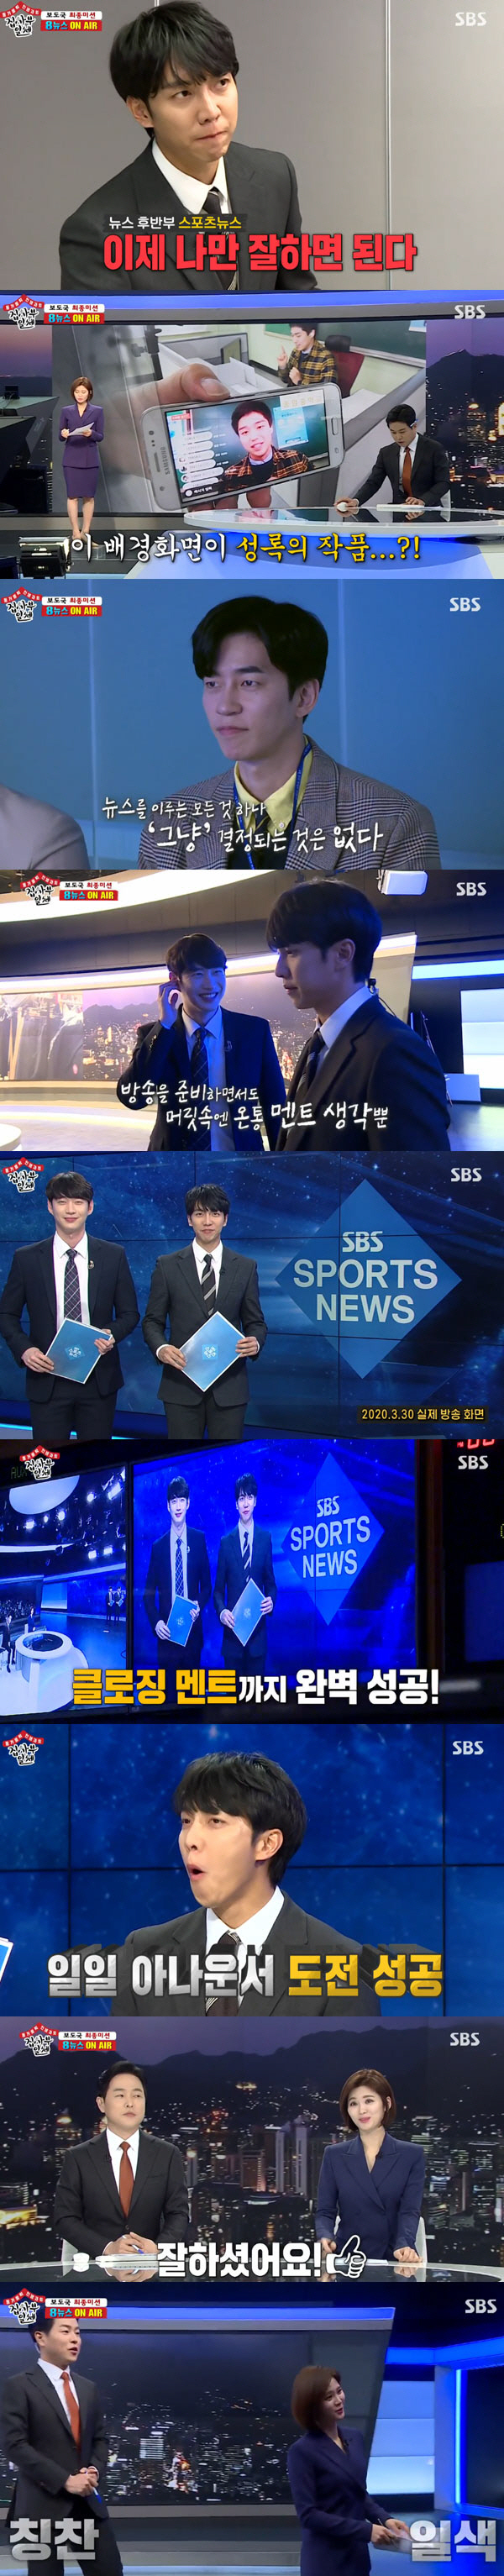 From Baek Jong-won and Ma Dong-Seok to Bong Joon-ho, All The Butlers members went directly to Moonlighting.On the 26th, SBS entertainment program All The Butlers was decorated with Broadcasting Station 24 oclock special after last week.The members struggle to be selected as SBS Super Rookie was included.The members who met with Hyun Woo and Choi Ye-rim anchor who are conducting SBS 8 oclock news last week and got the opportunity to participate in the news.At the end of the mission, Lee Seung-gi had a chance to broadcast sports news and Cha Eun-woo had the opportunity to participate in radio news live.Lee Seung-gi, who was in the exclusive closing of sports news, made a mistake by preparing for rehearsal in tension.While Lee Seung-gi made a mistake, the radio broadcast began, and Cha Eun-woo was perfectly successful from English language interview to next news delivery even in the tension.Finally, Lee Seung-gis turn and news began with sports news signal music.Lee Seung-gi was praised by anchors for his nervous appearance and perfect closing comment.The Hyun Woo anchor admired it, saying, It is enough to replace Yoon Sang-i right now.Following the editing, the task of referring to the master was also followed.Shin Sung-rok called Han Ji-min and tried to get in touch, but Han Ji-min said, Ill text you. He hung up and sent an emoticon to laugh.Cha Eun-woo called You Hee-yeol, who was happy to get the call but after grasping the situation, said: This friend is turning more than he looks?, blasting a stone fastball, making the crowd laugh.Yang Se-hyeong called Baek Jong-won, who is appearing on the air together, and tried to get involved. Baek Jong-won said, What am I going to do? But he decided to invite the members home after saying I will try hard to continue persuasion.Kim Dong-Hyun called actor Ma Dong-Seok.He persuaded him that he was resting while preparing to shoot Crime City 2 and eventually got a promise saying, I will make fun time when time comes.Lee Seung-gi called the master Bong Joon-ho, who said even before calling: Its a problem, even if its not a problem.I hope I can not be honest, he said, but he did not get a phone call. Lee Seung-gi left a voice message saying he wanted to be invited.After all the missions, Choi Young-in finally announced the successful candidate. Choi chose him as Super Rookie, saying, I will select Cha Eun-woo after seeing the possibility of growth.After seeing Lee Seung-gi, who expressed regret, In fact, skill is also important; Lee Seung-gi is too hyperbolic to be a rookie.I will hire Seung-ki as a career PD. 